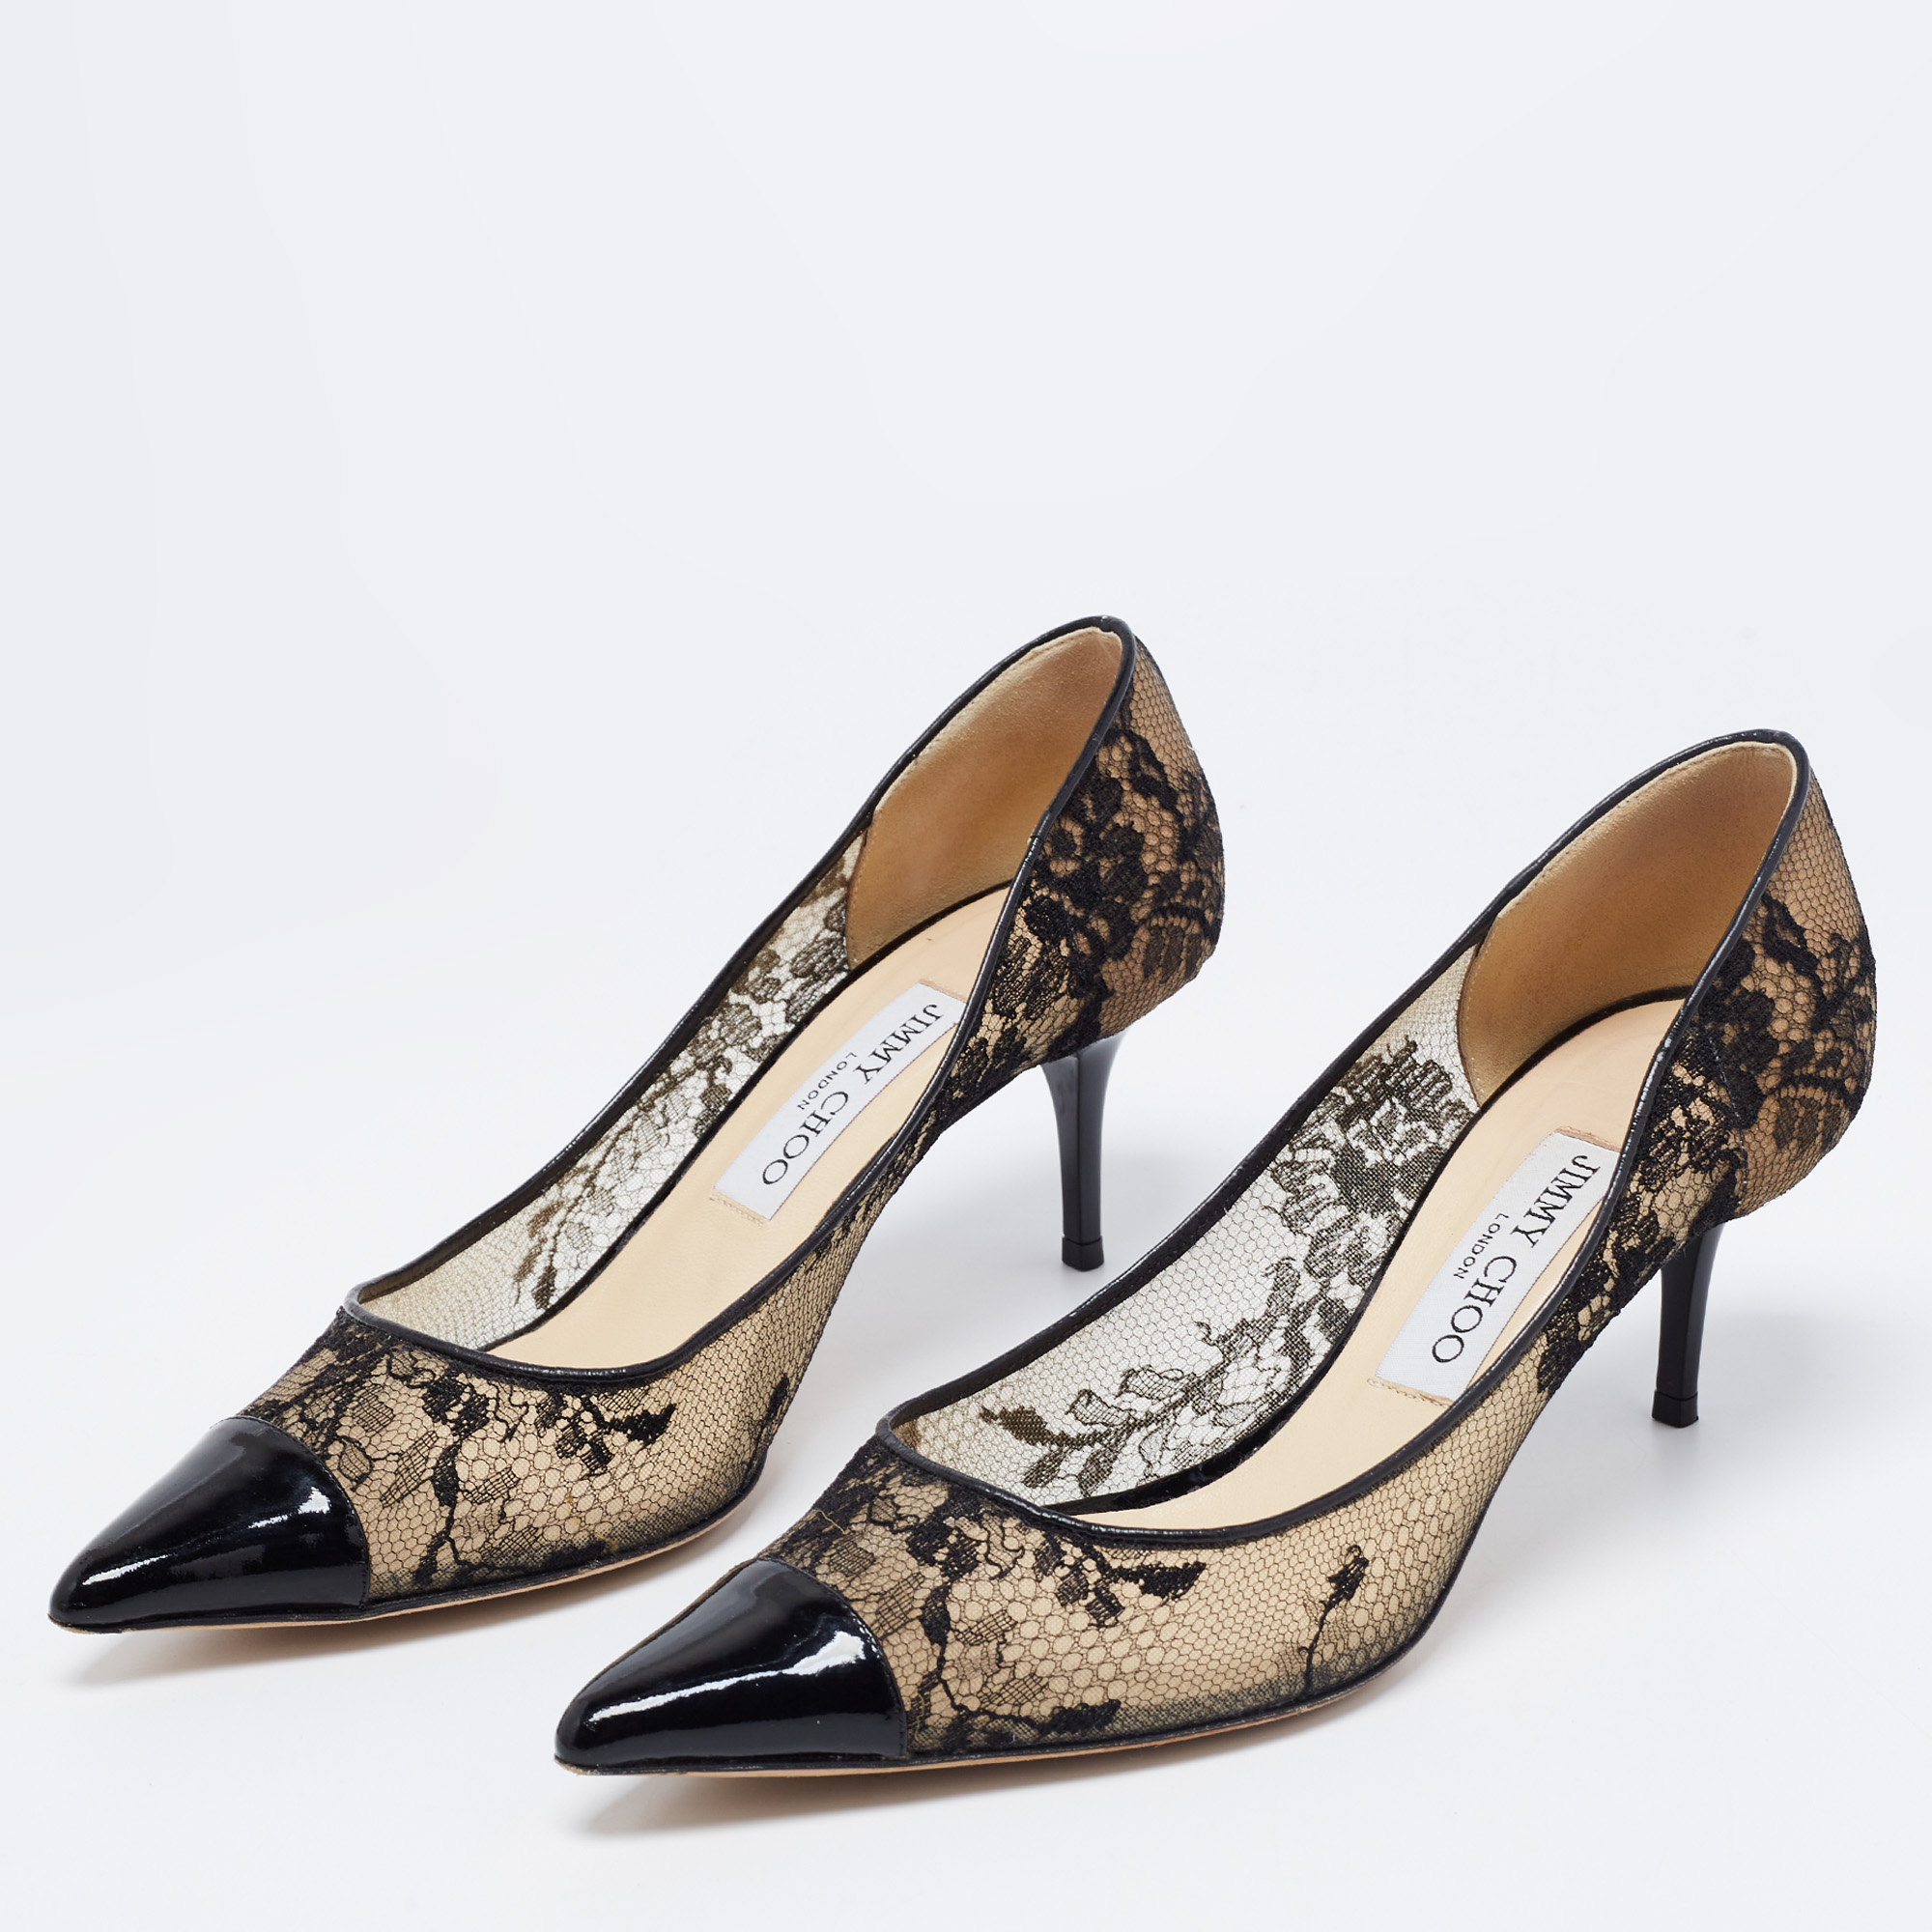 Jimmy Choo Black Lace and Patent Leather Pointed-Toe Pumps Size